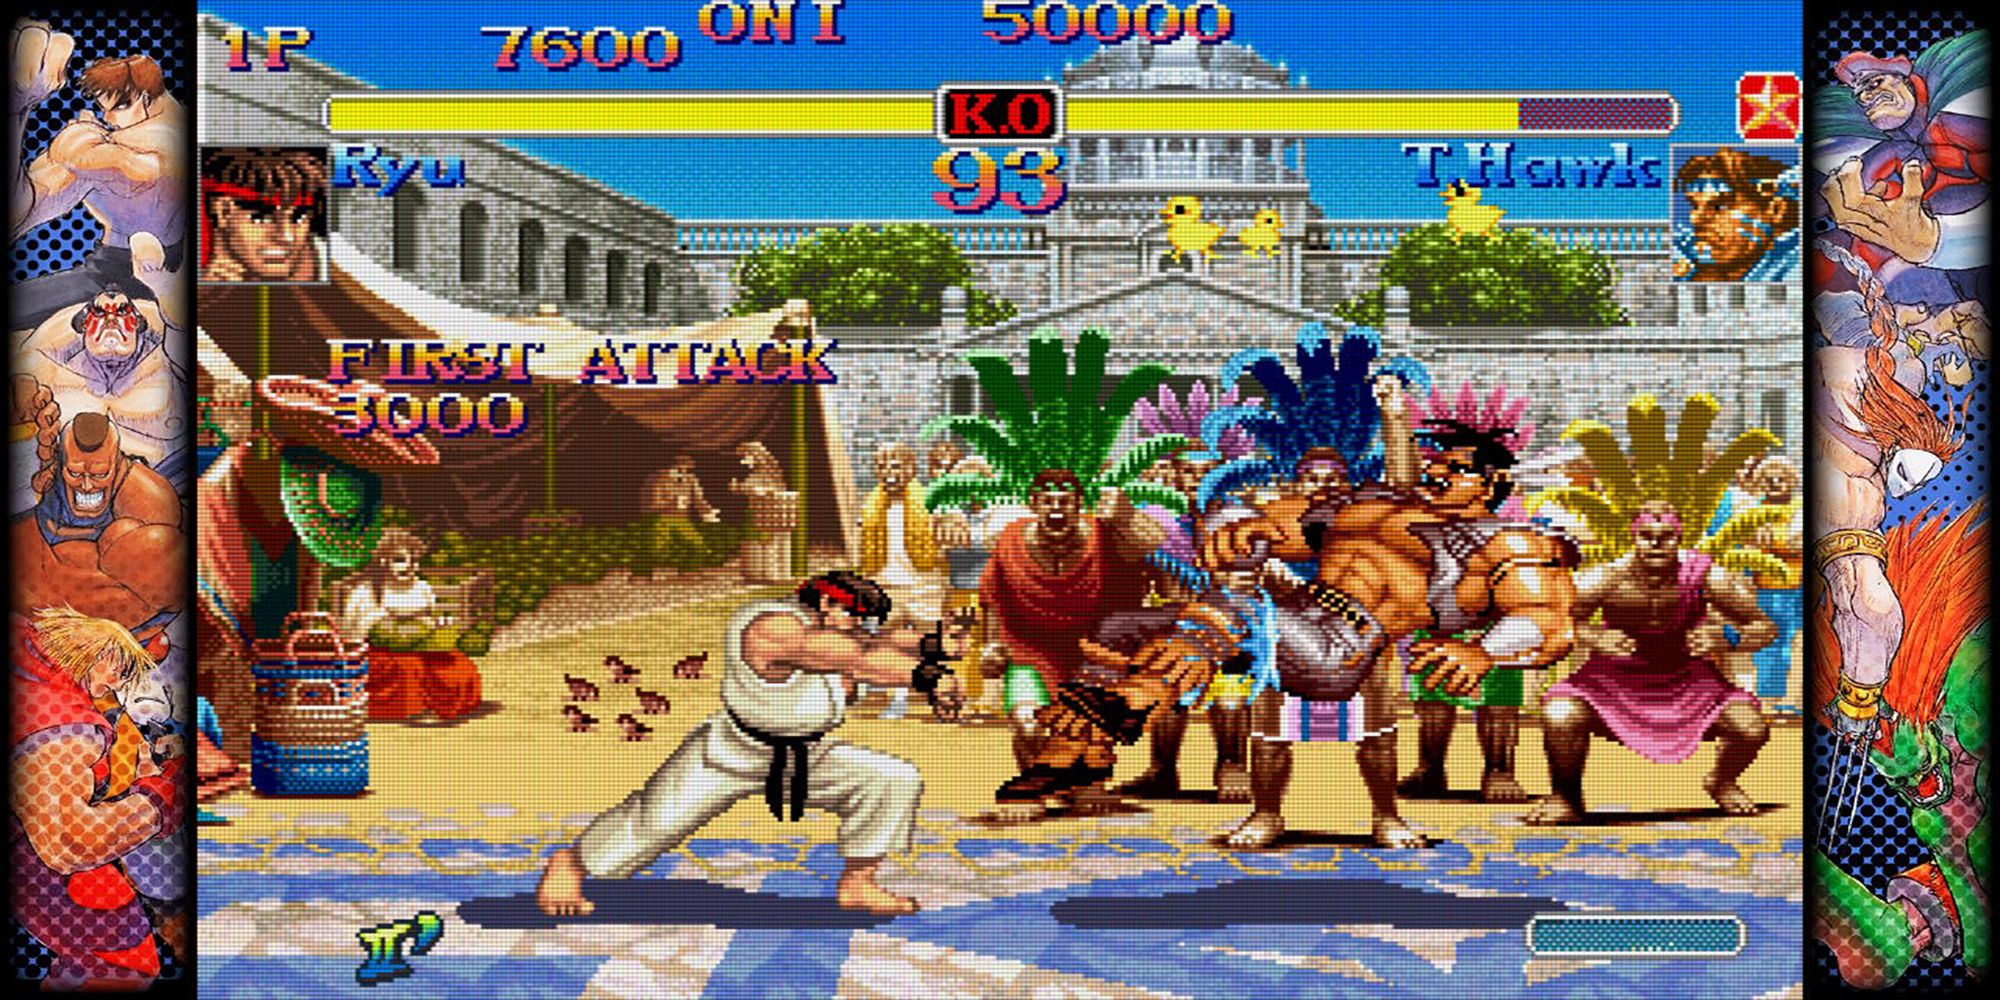 Ryu hits T Hawk with a Hadouken during a battle in Mexico in Hyper Street Fighter 2: The Anniversary Edition, a game in Capcom Fighting Collection.